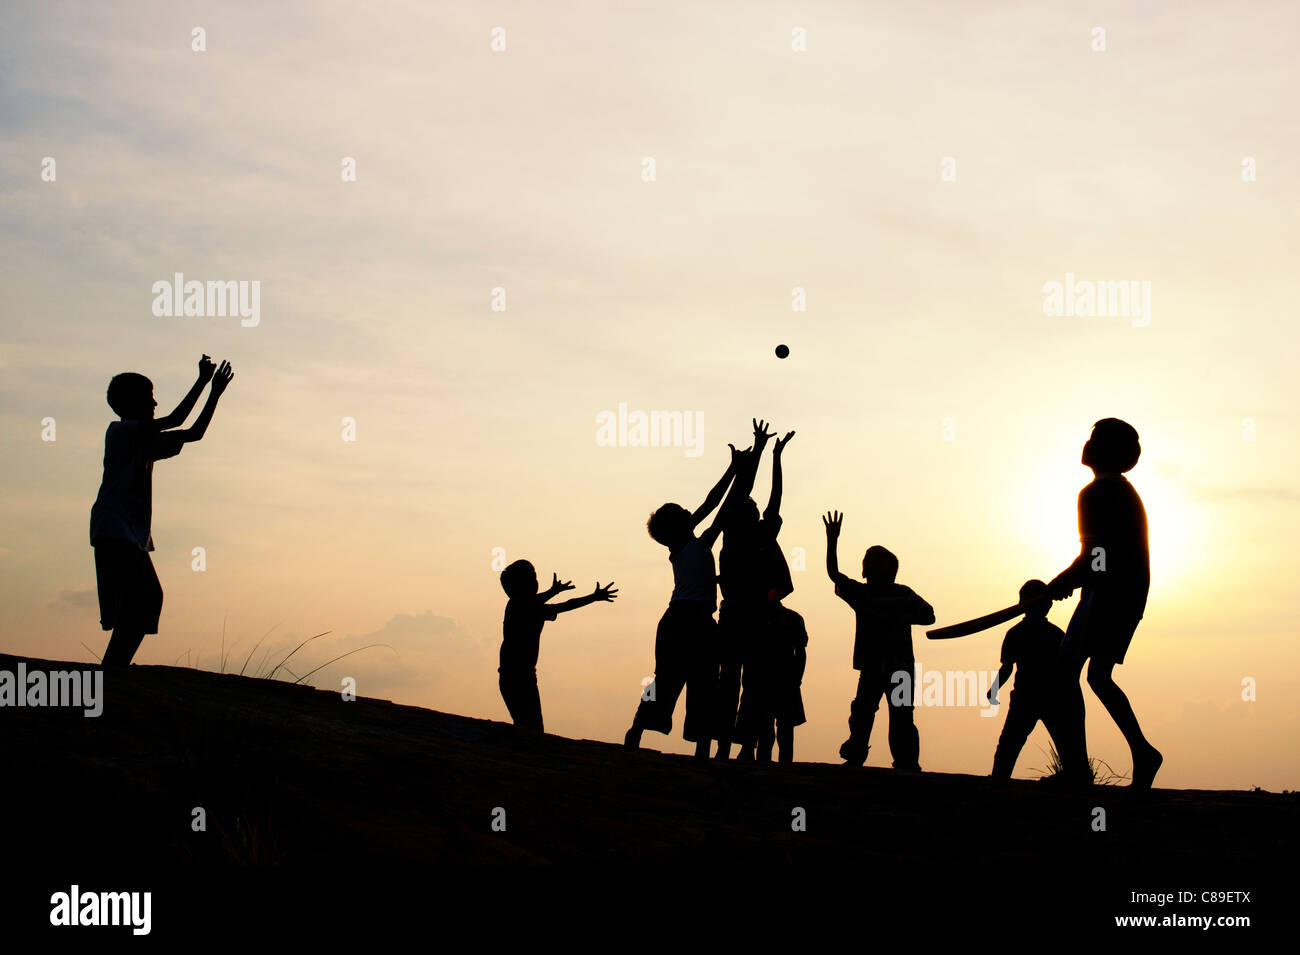 Silhouette of young Indian boys playing french cricket at sunset in India Stock Photo